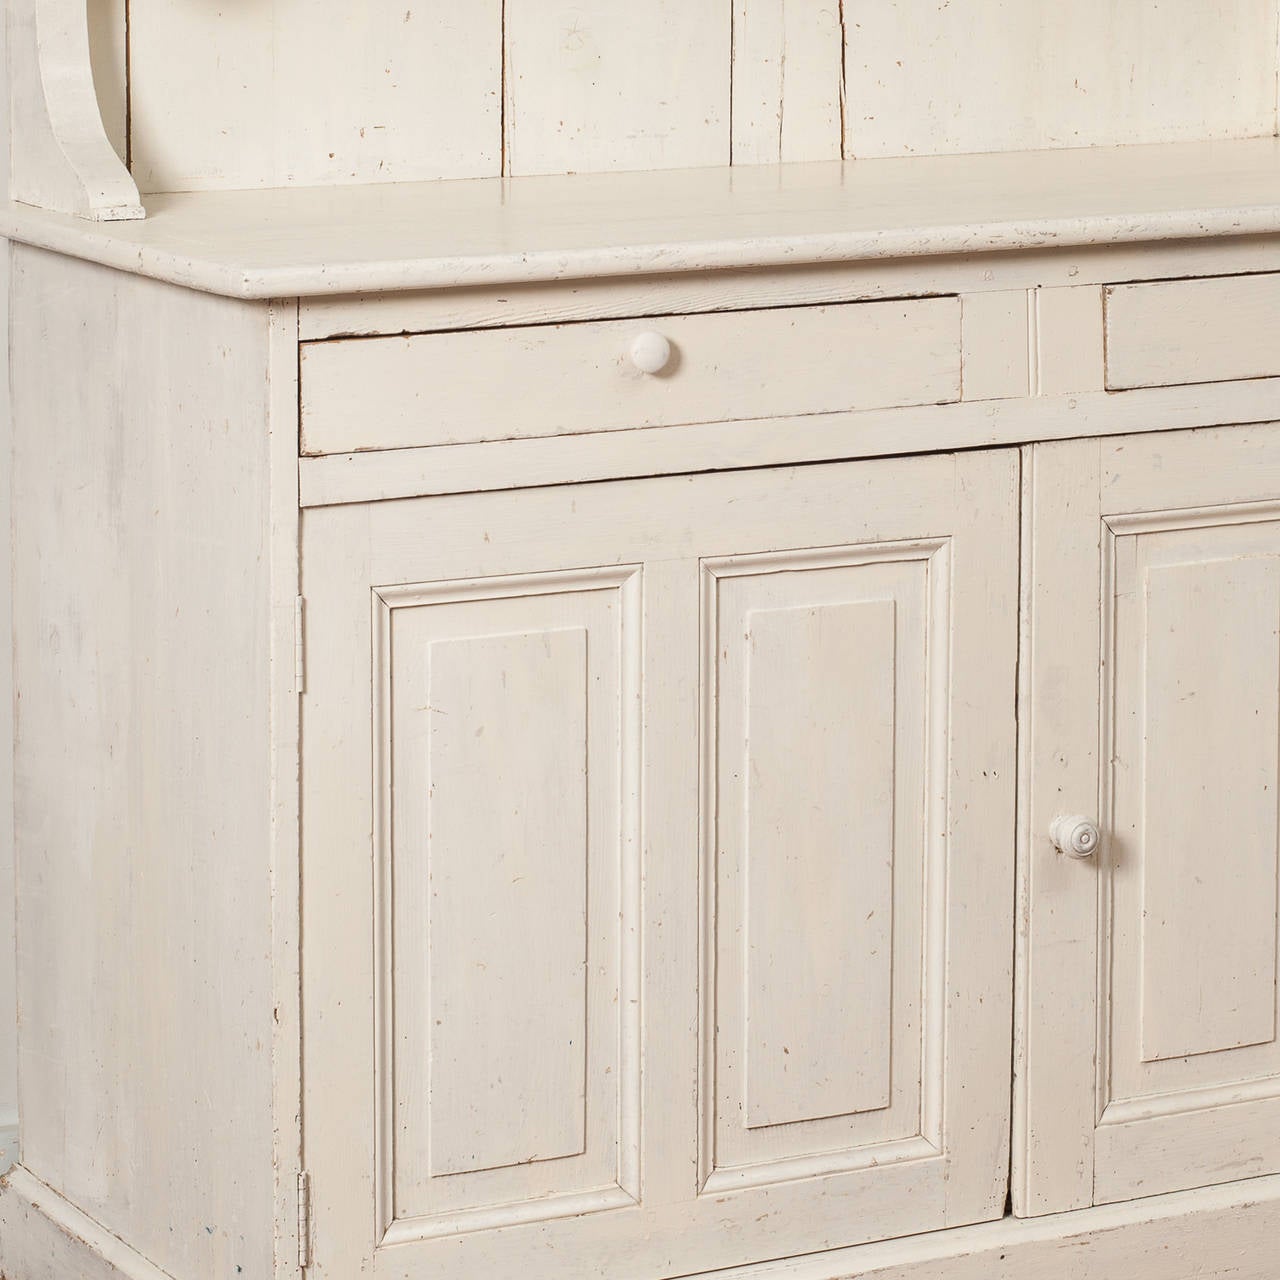 A French white painted country cupboard, circa 1900.
This is a great piece for a country kitchen or pantry with three shelves for display, and two cupboard doors beneath with two interior shelves for storage. The old white paint has been refreshed